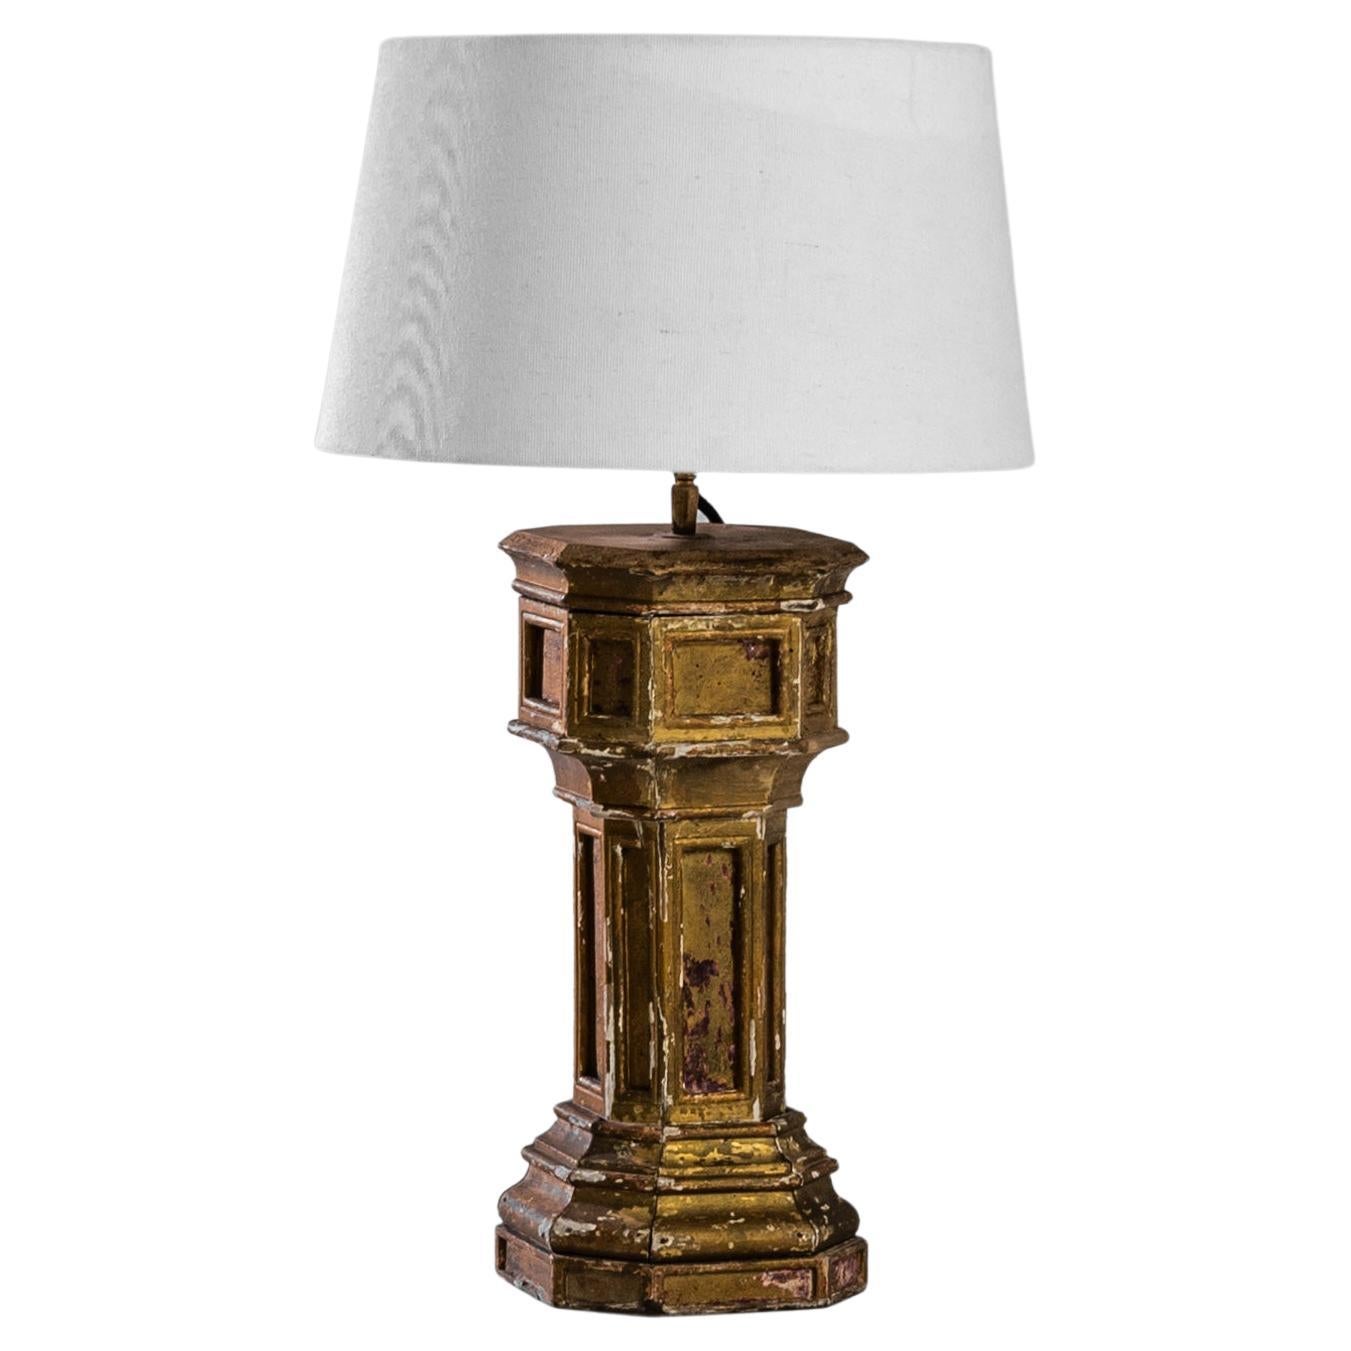 1880s French Gilded Wooden Table Lamp